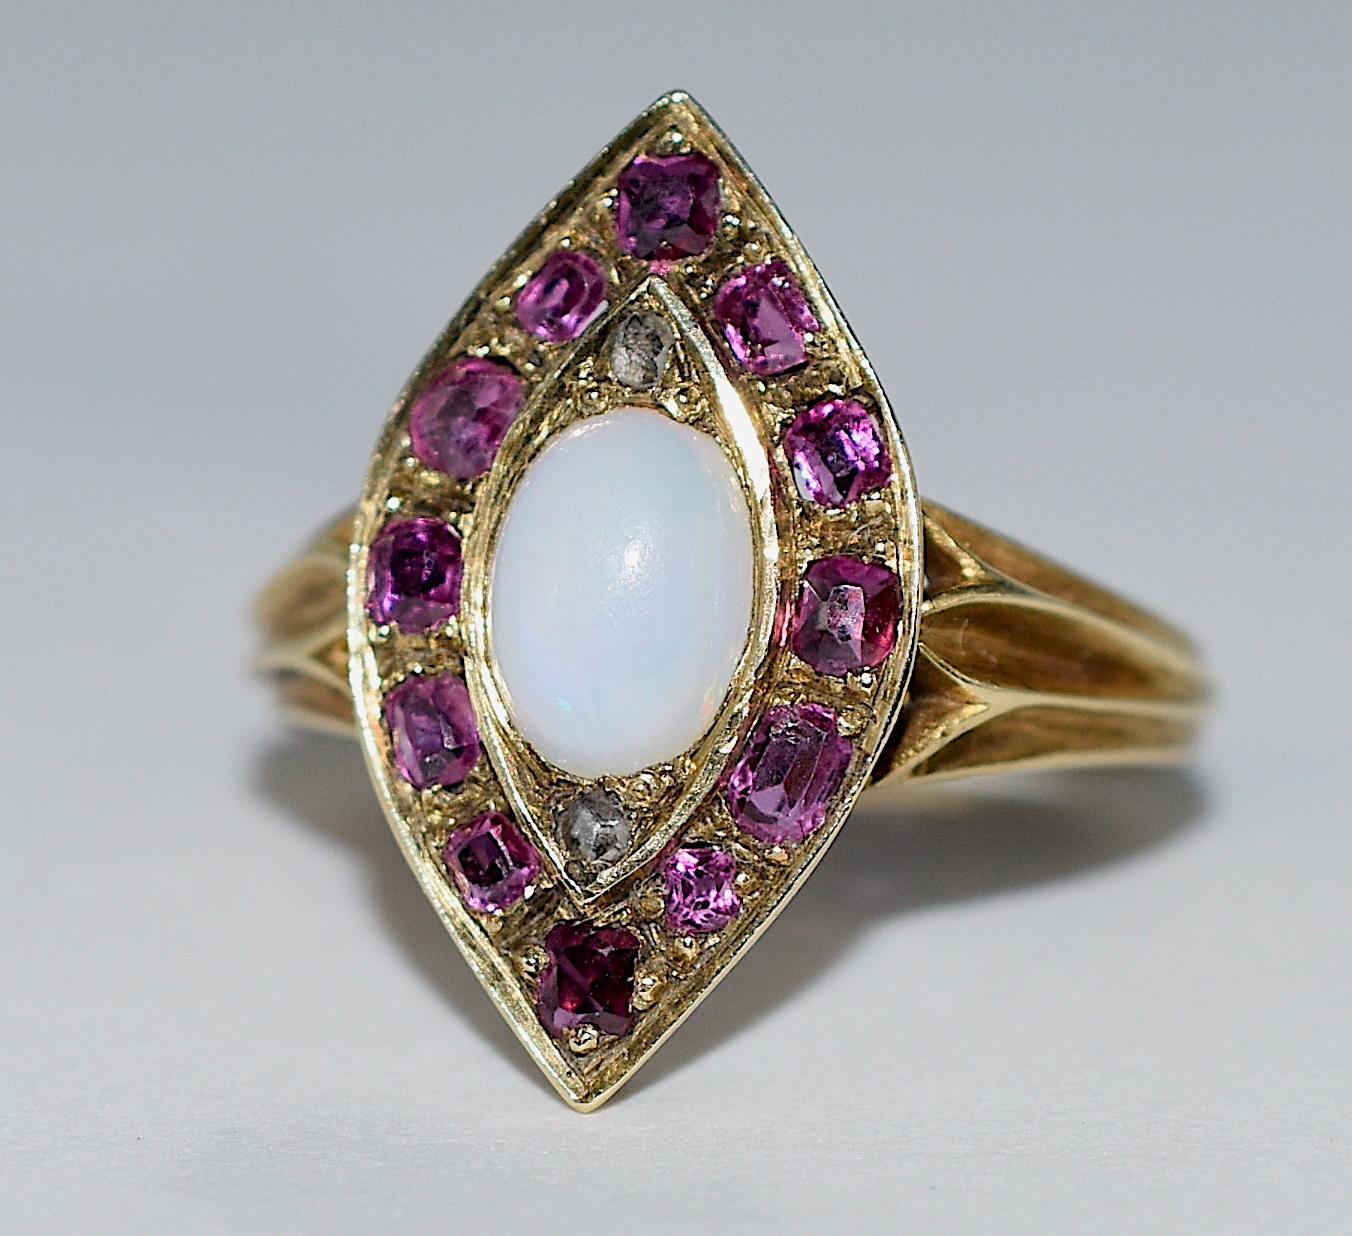 Our marquis shaped 18K ring, emblematic of the gothic arch, has twelve channel set old-cut rubies and a central cabochon opal accented with rose diamonds at each pointed arch. The ring is a 